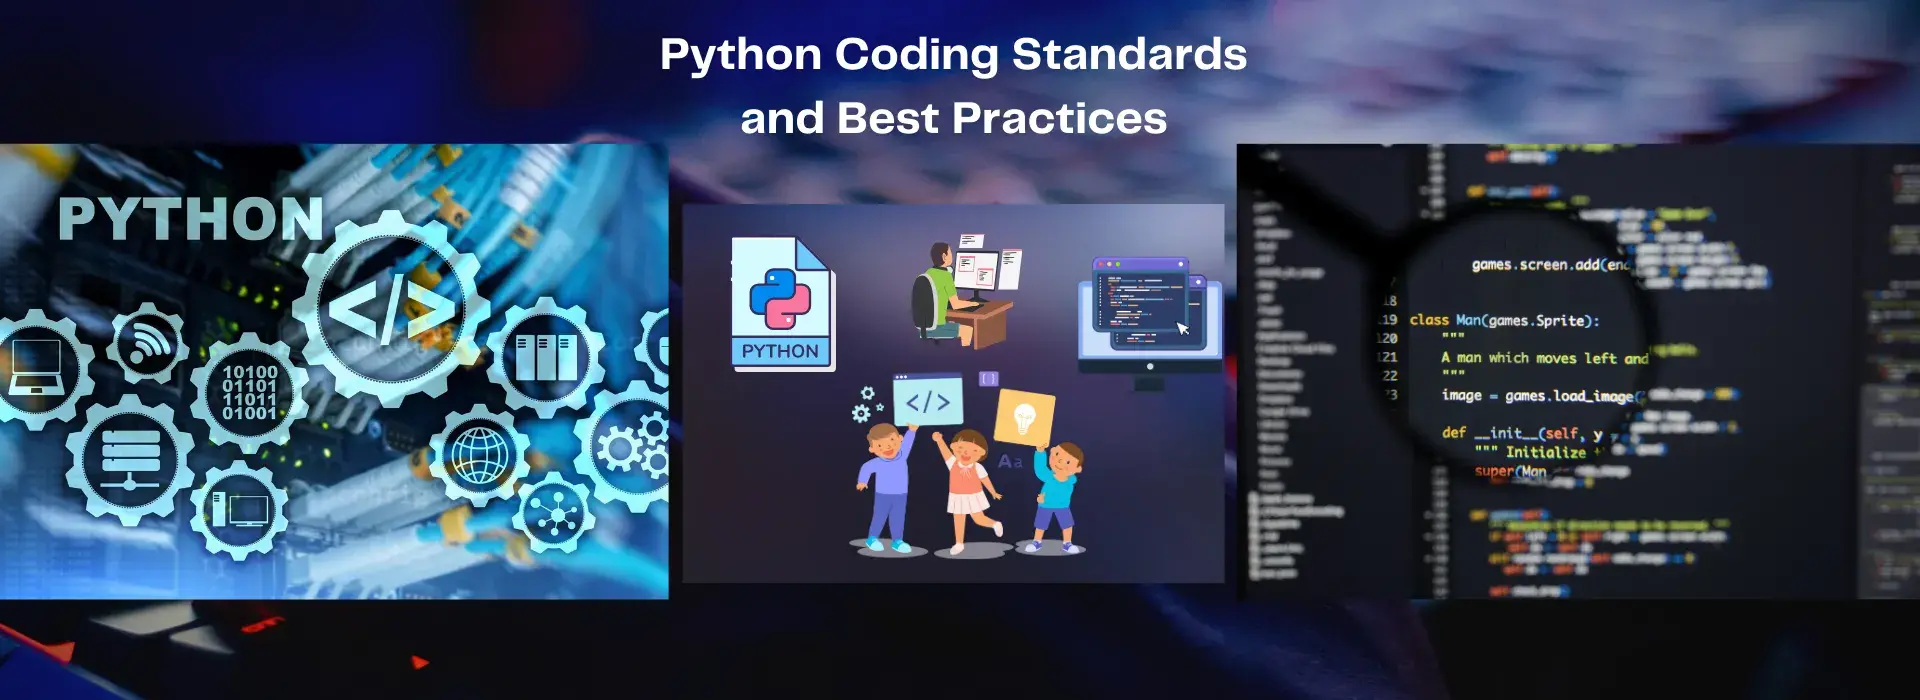 Python Coding Standards and Best Practices